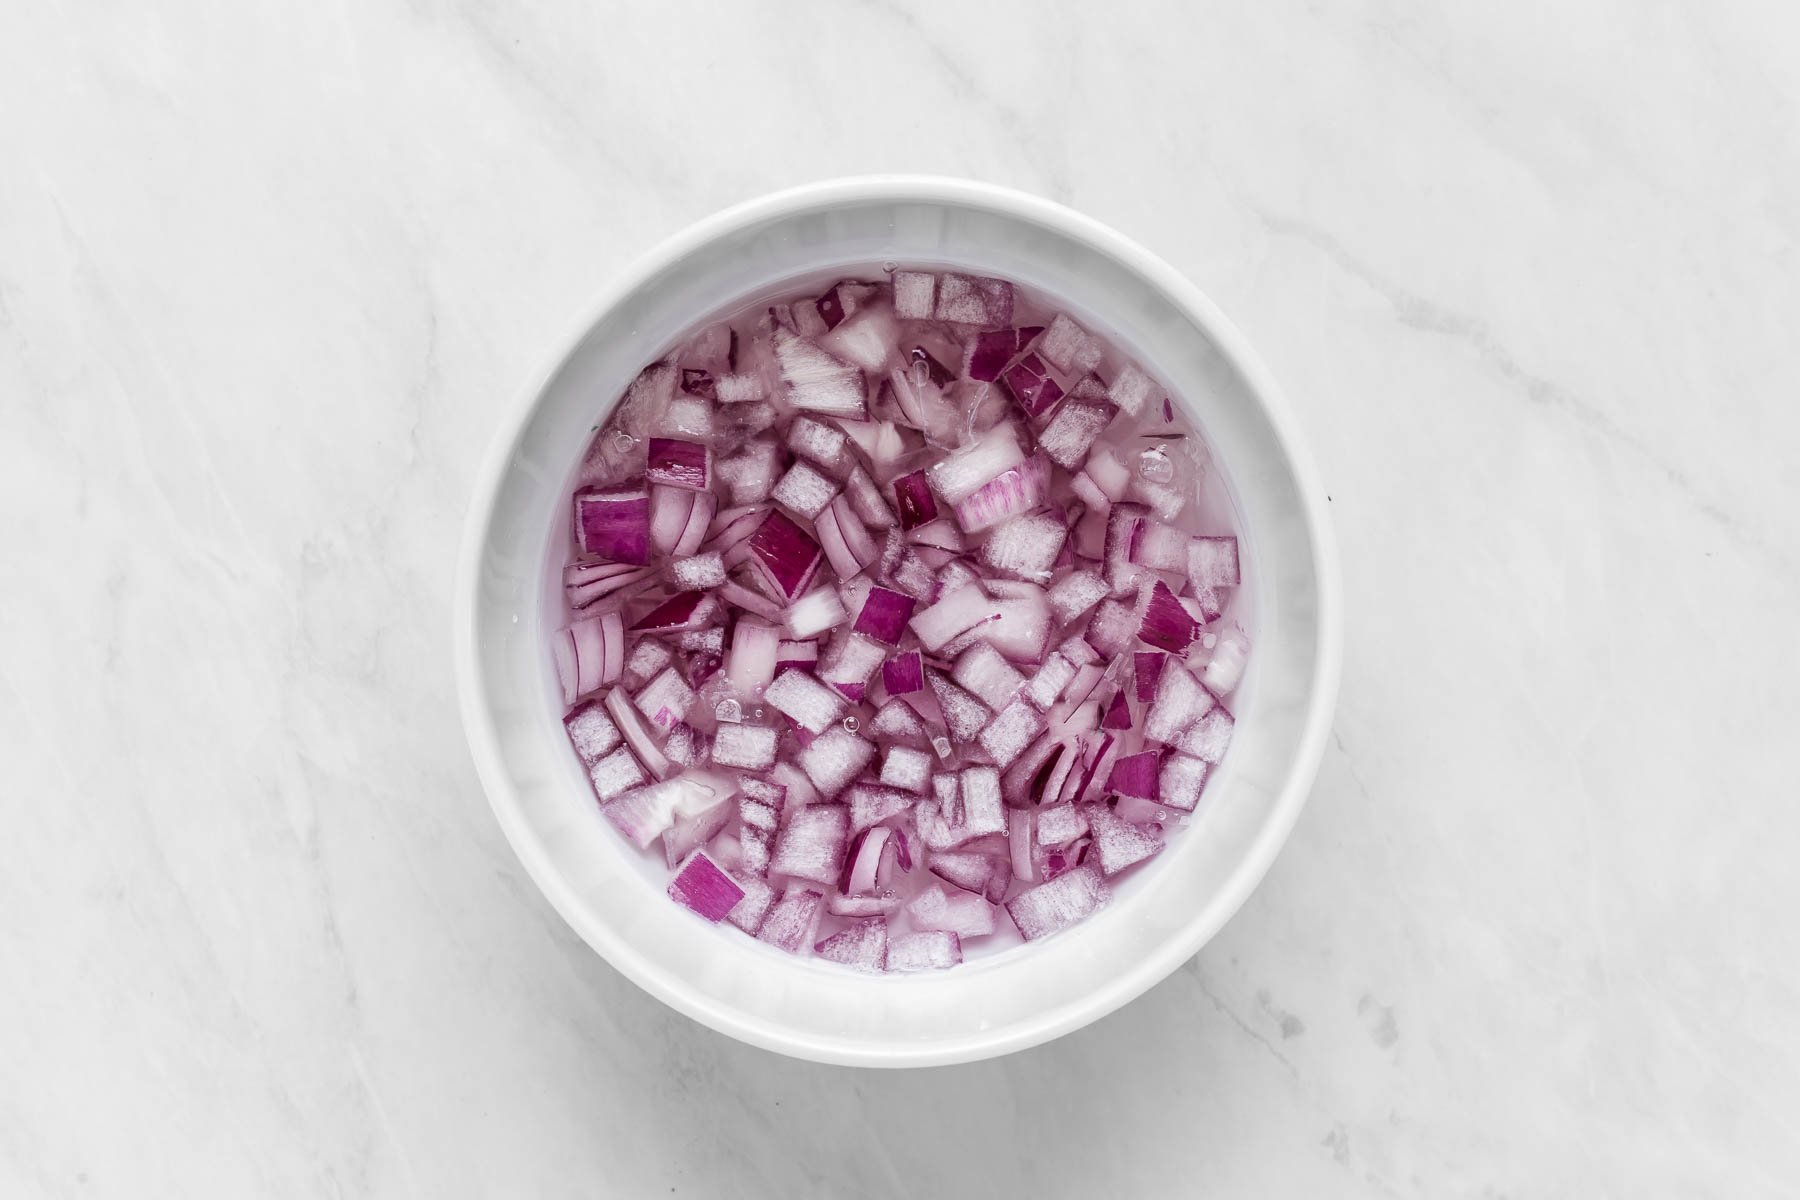 Diced red onions in bowl covered with warm water.